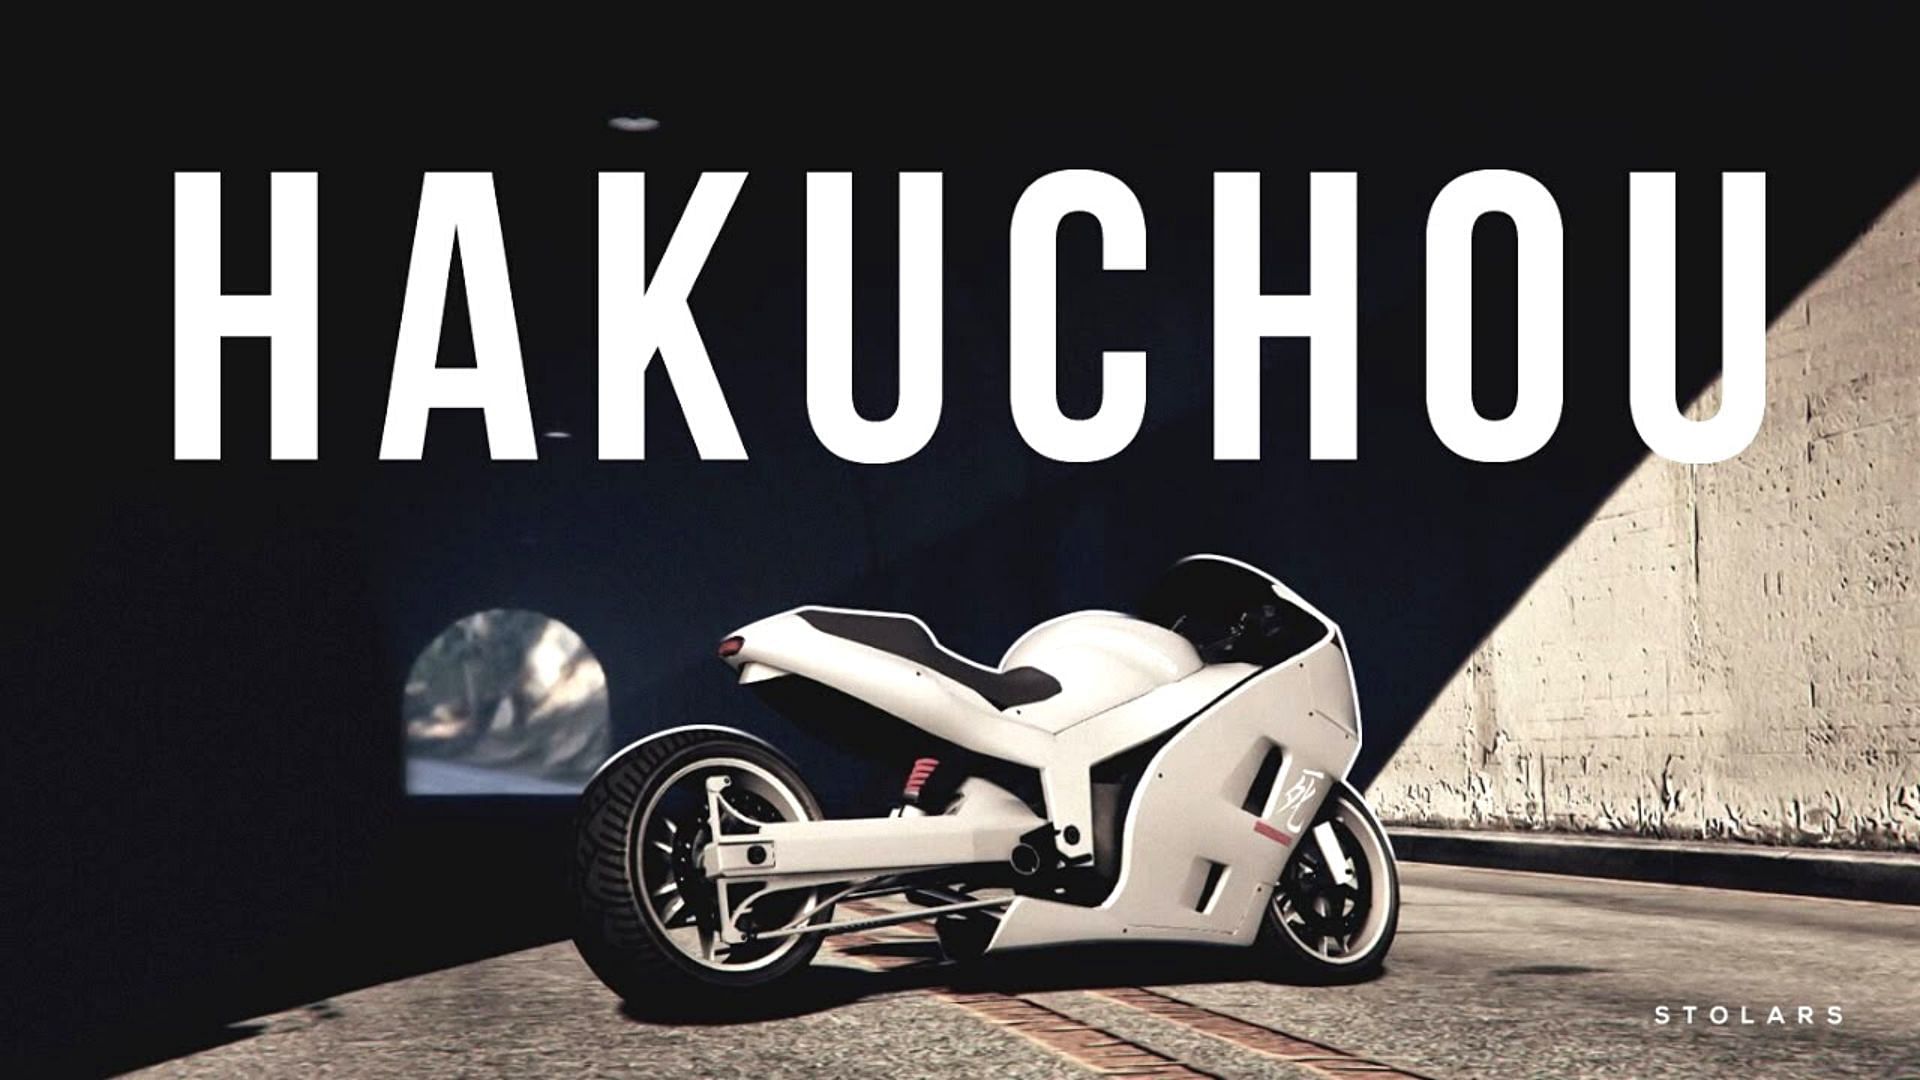 A brief about the Hakuchou Drag bike available for last gen players in GTA Online (Image via Rockstar Games)